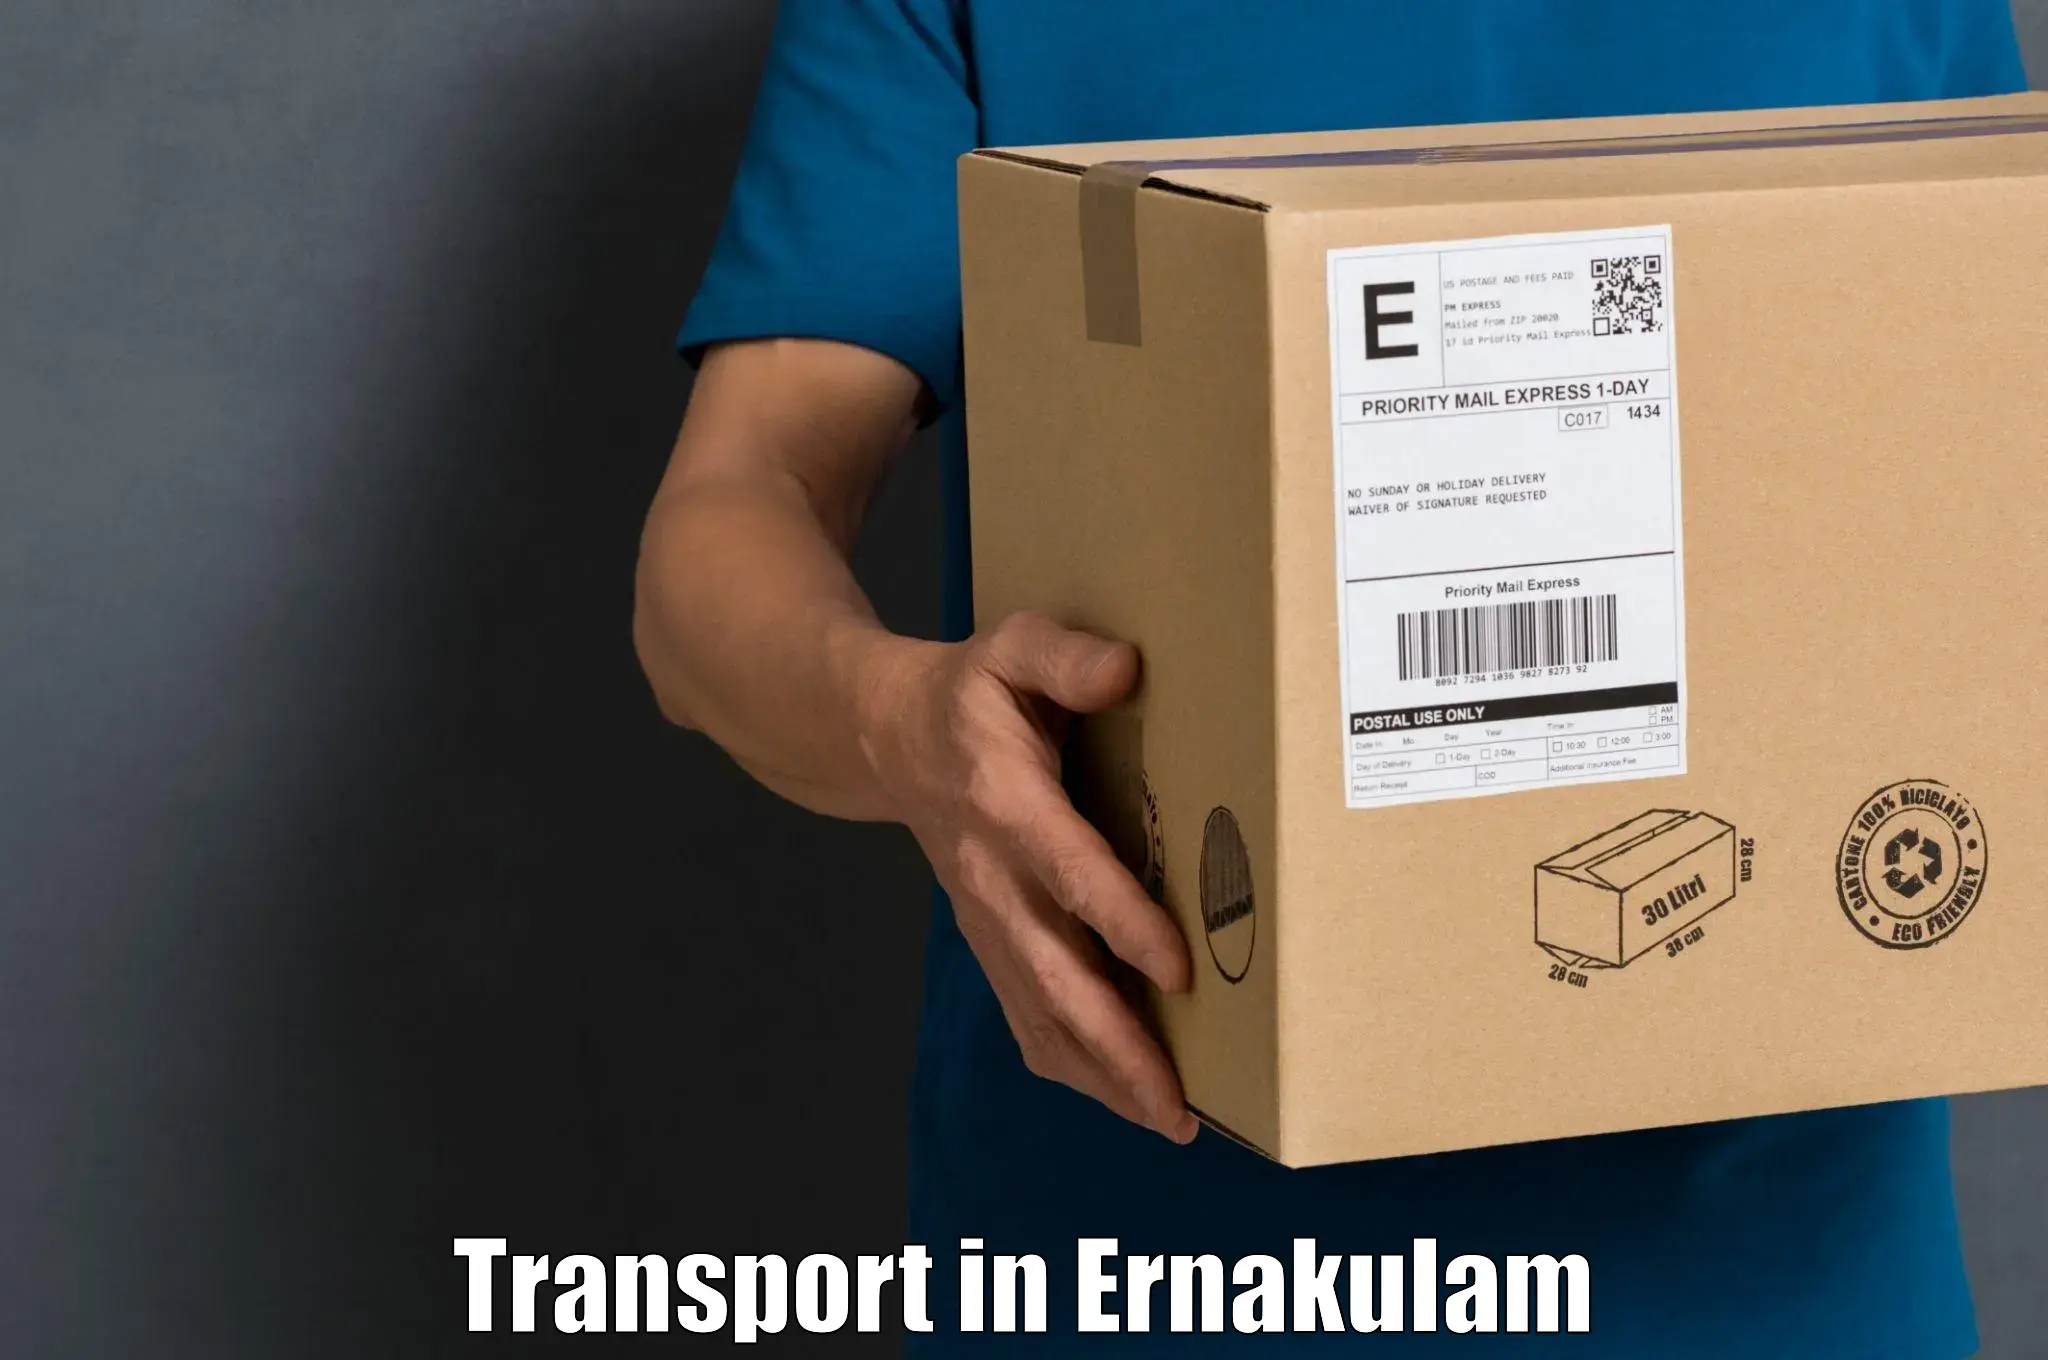 Container transportation services in Ernakulam